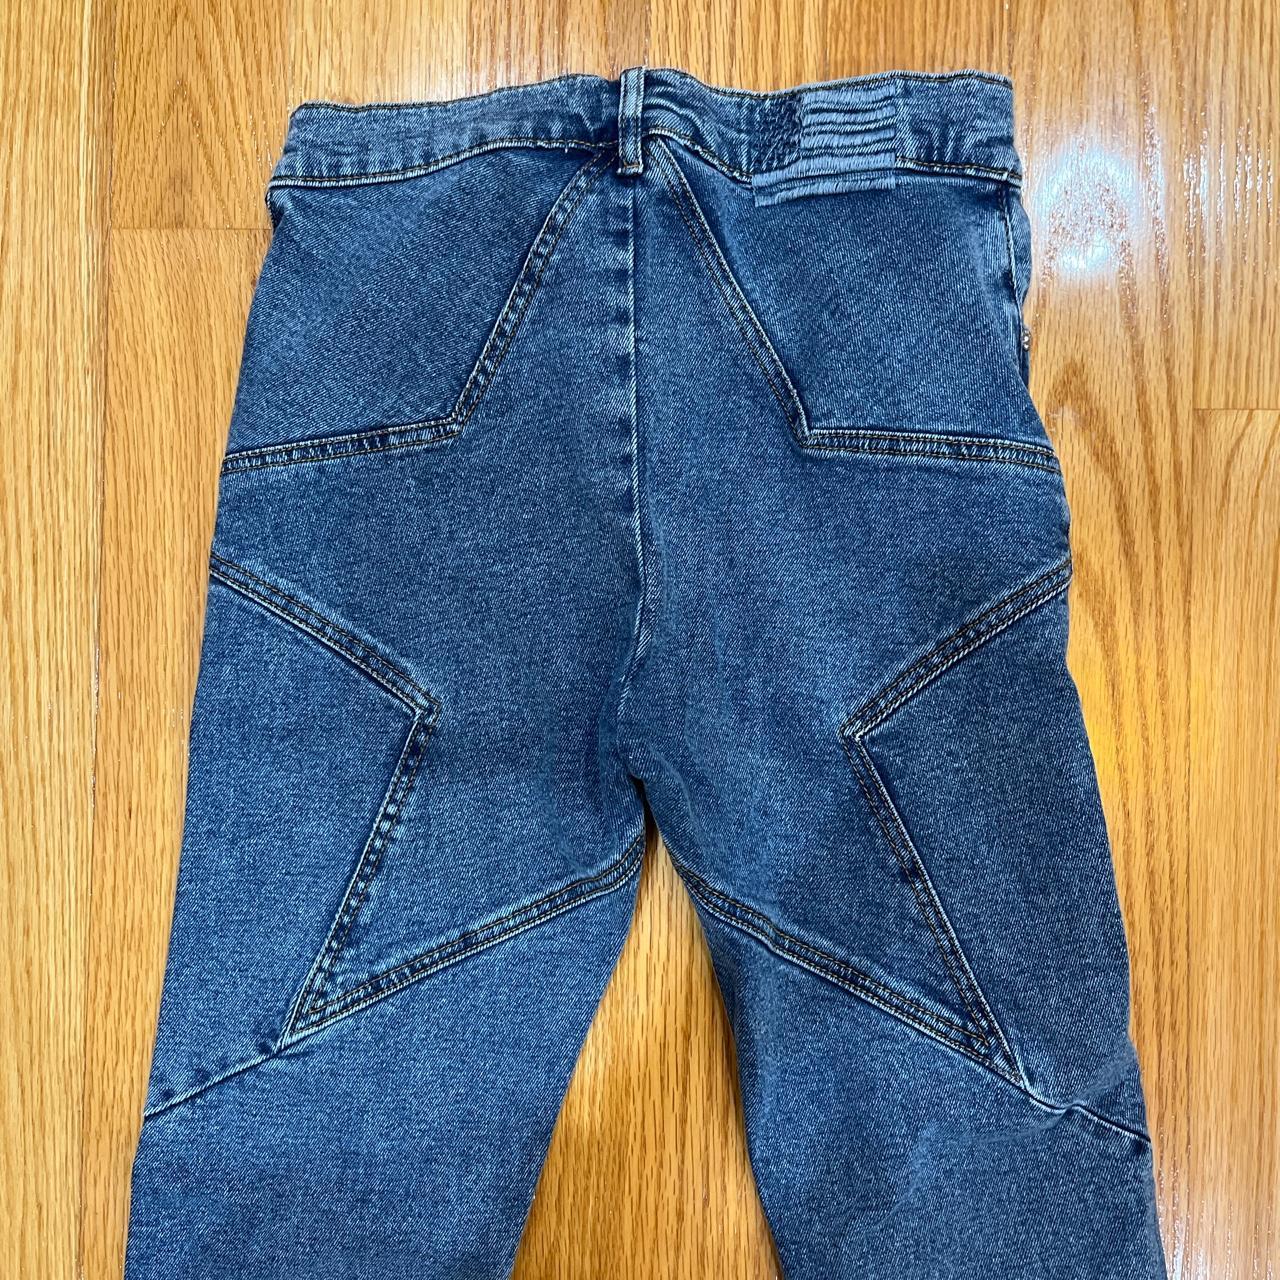 Revice jeans. star stitching on the back. Size 26.... - Depop